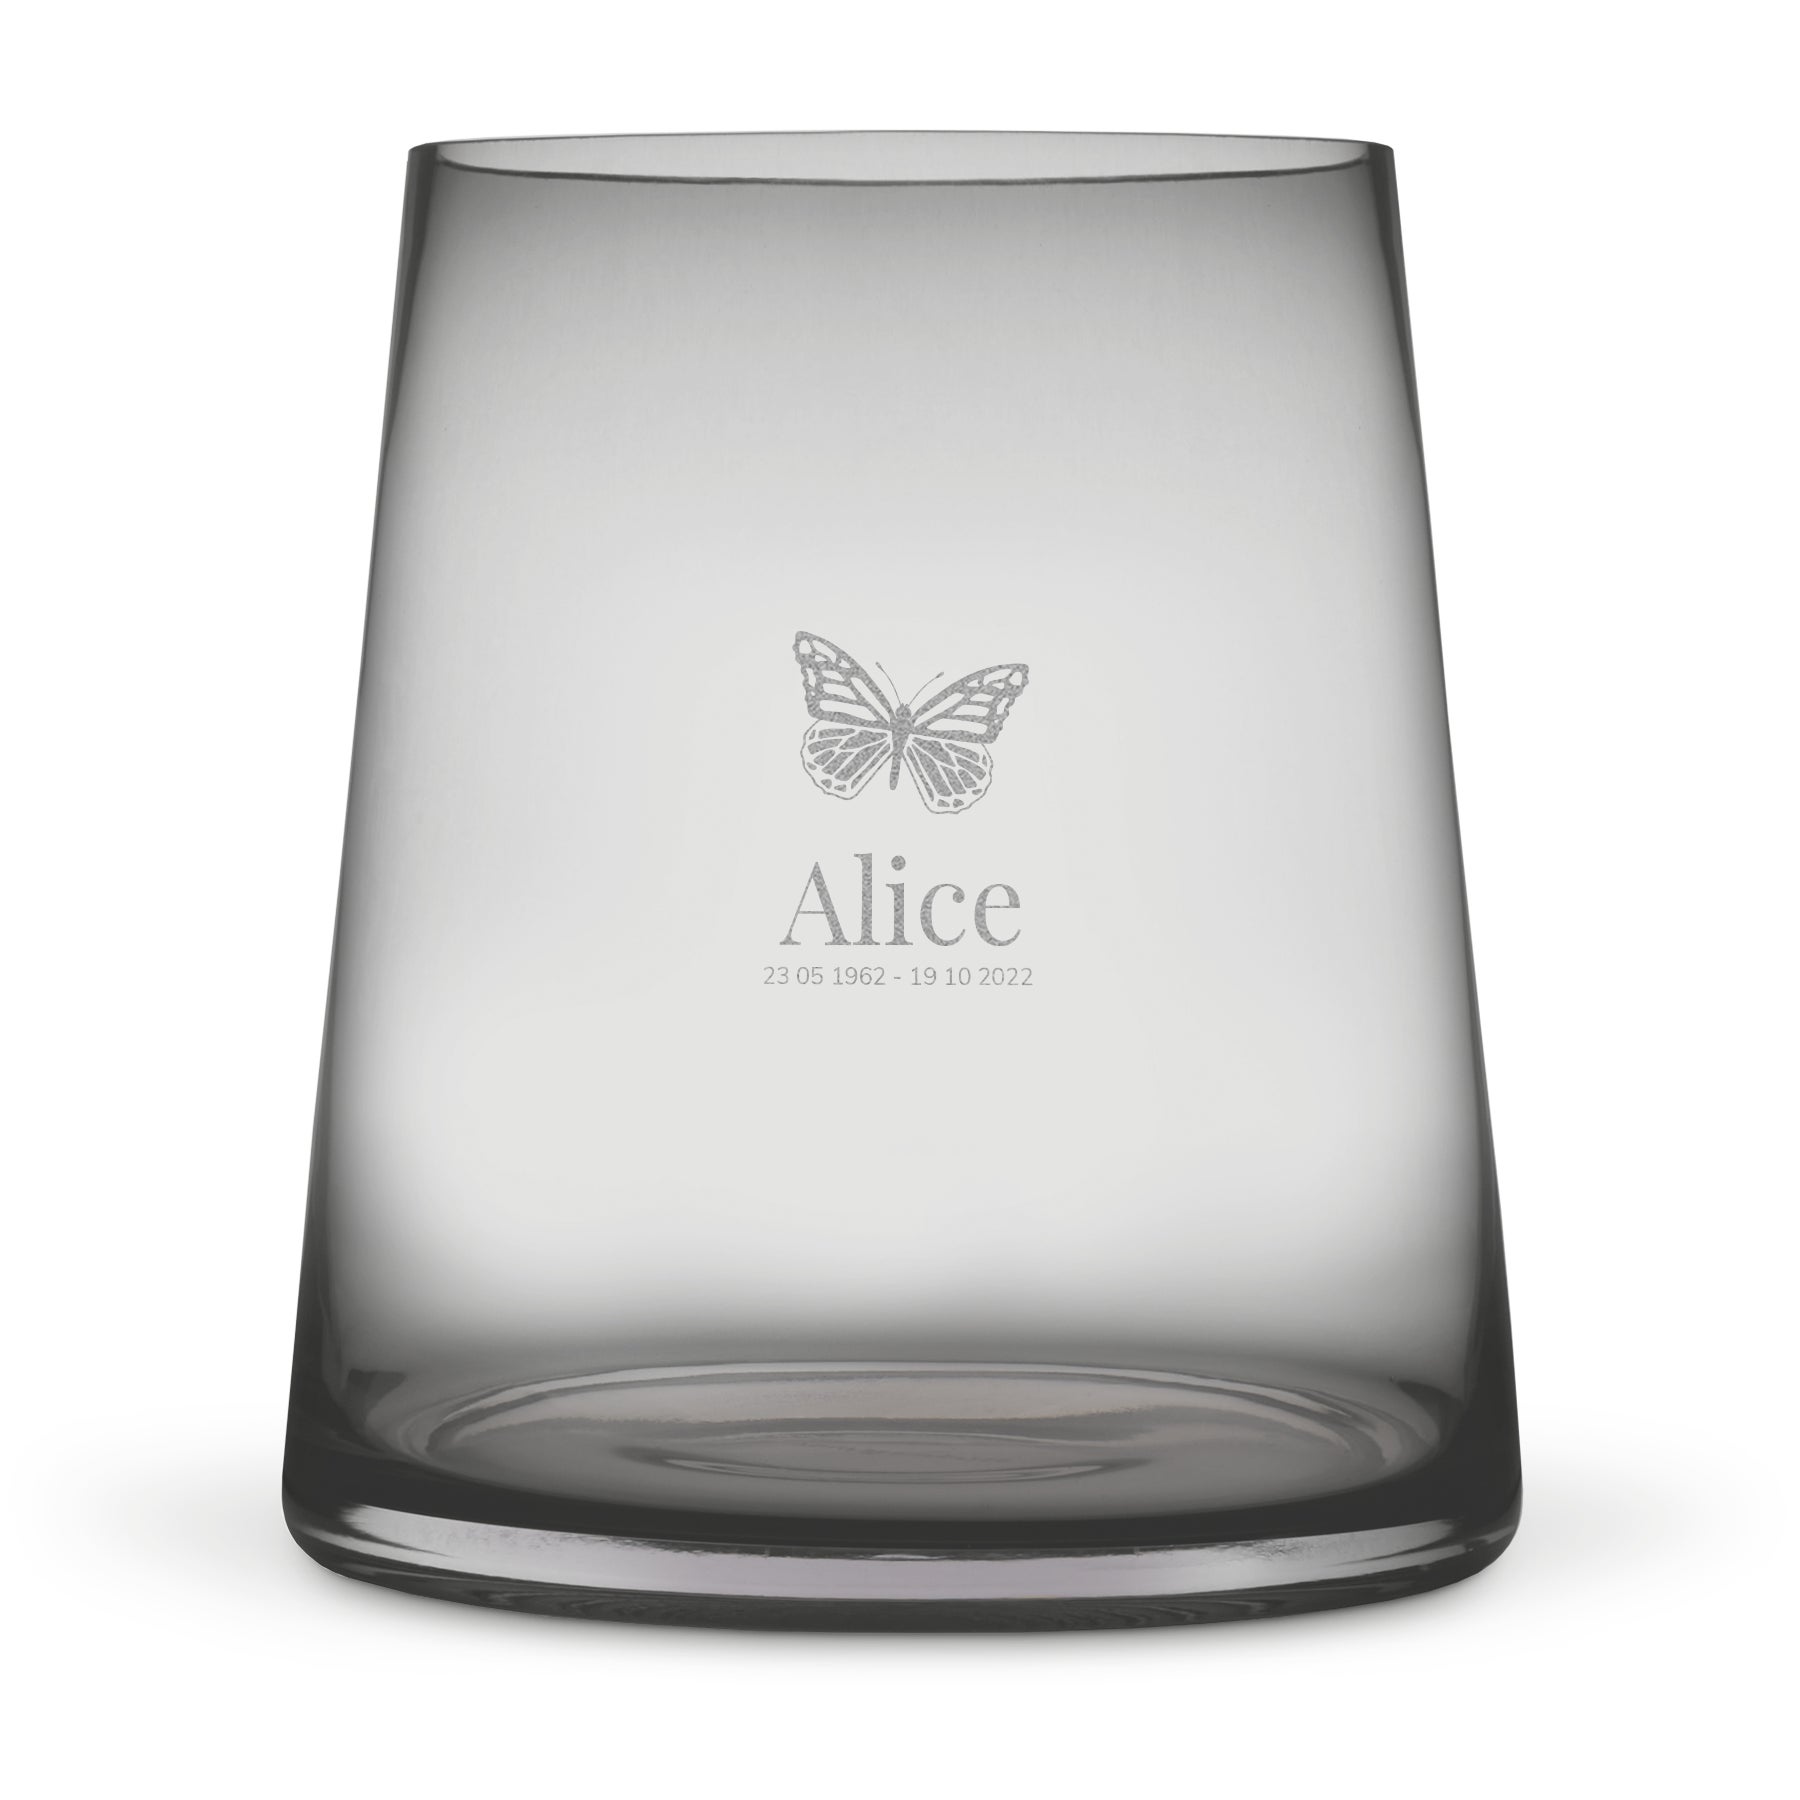 Engraved vase - Tinted glass